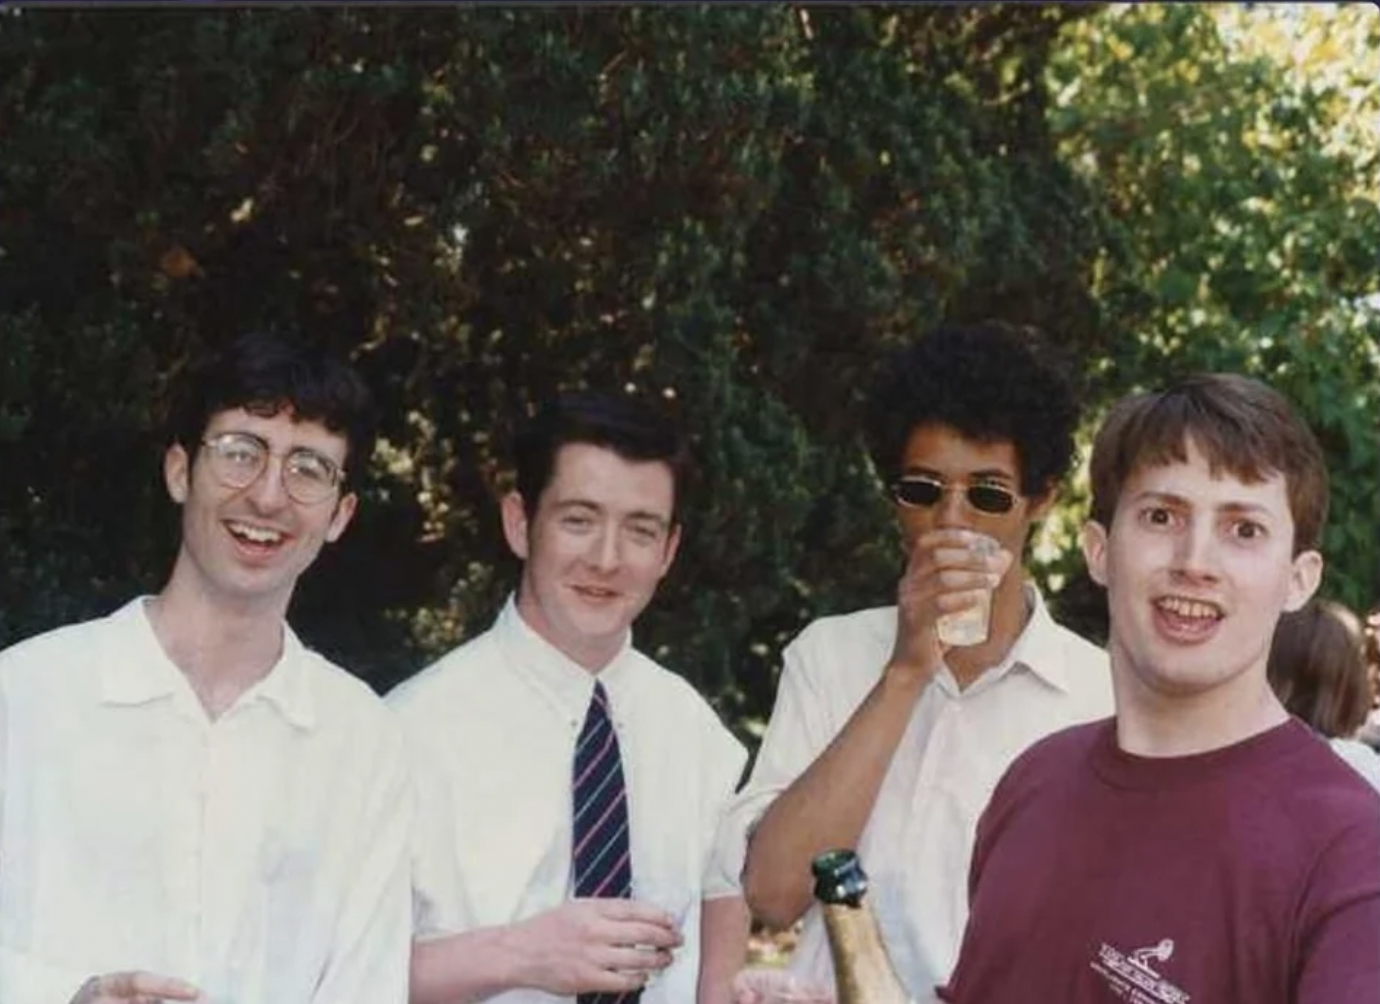 John Oliver in college with Richard Ayoade and David Mitchell.